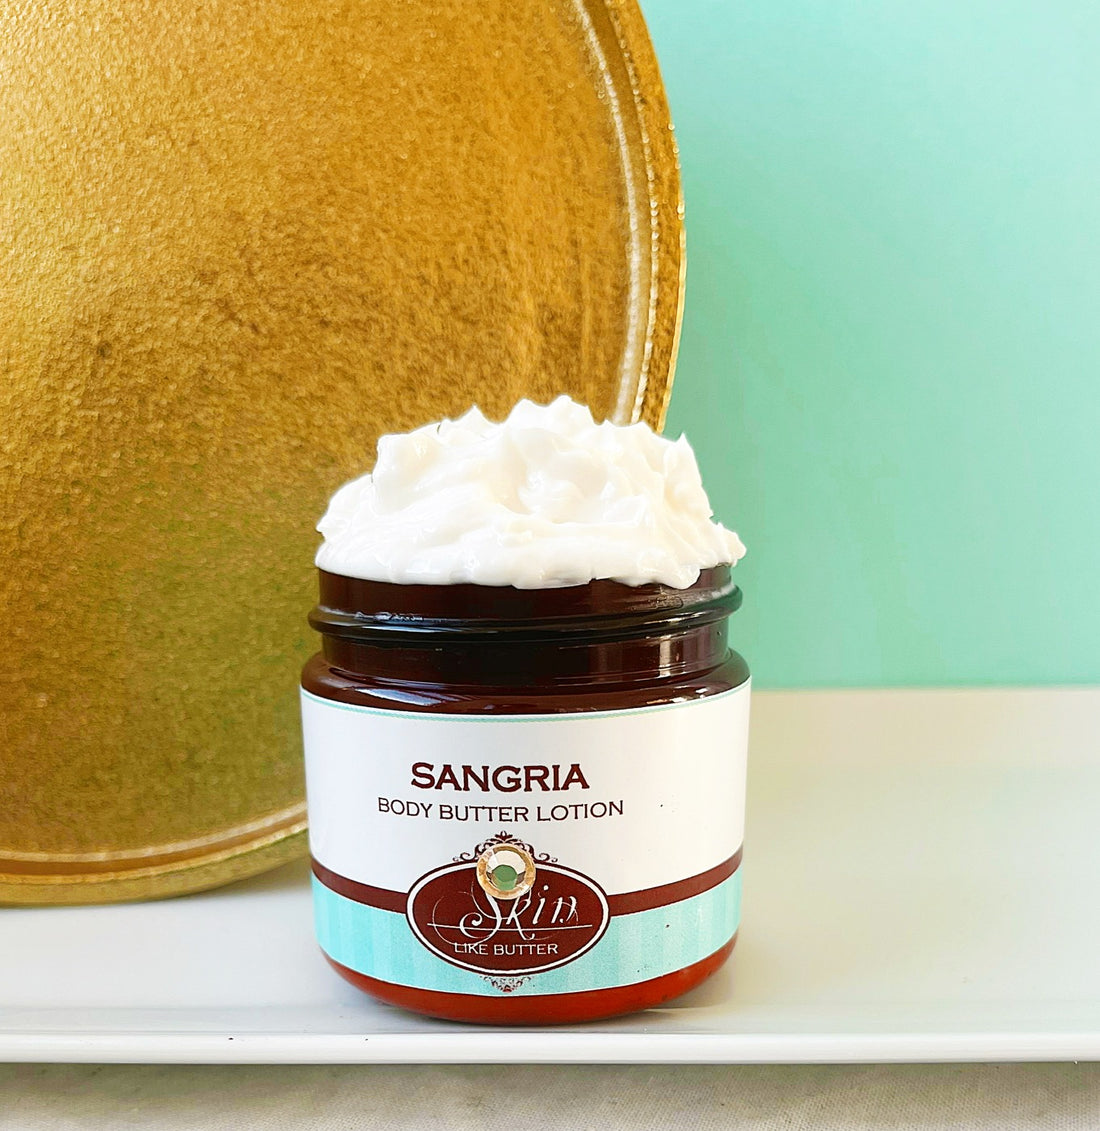 SANGRIA scented water free, vegan non-greasy Skin Like Butter Body Butter